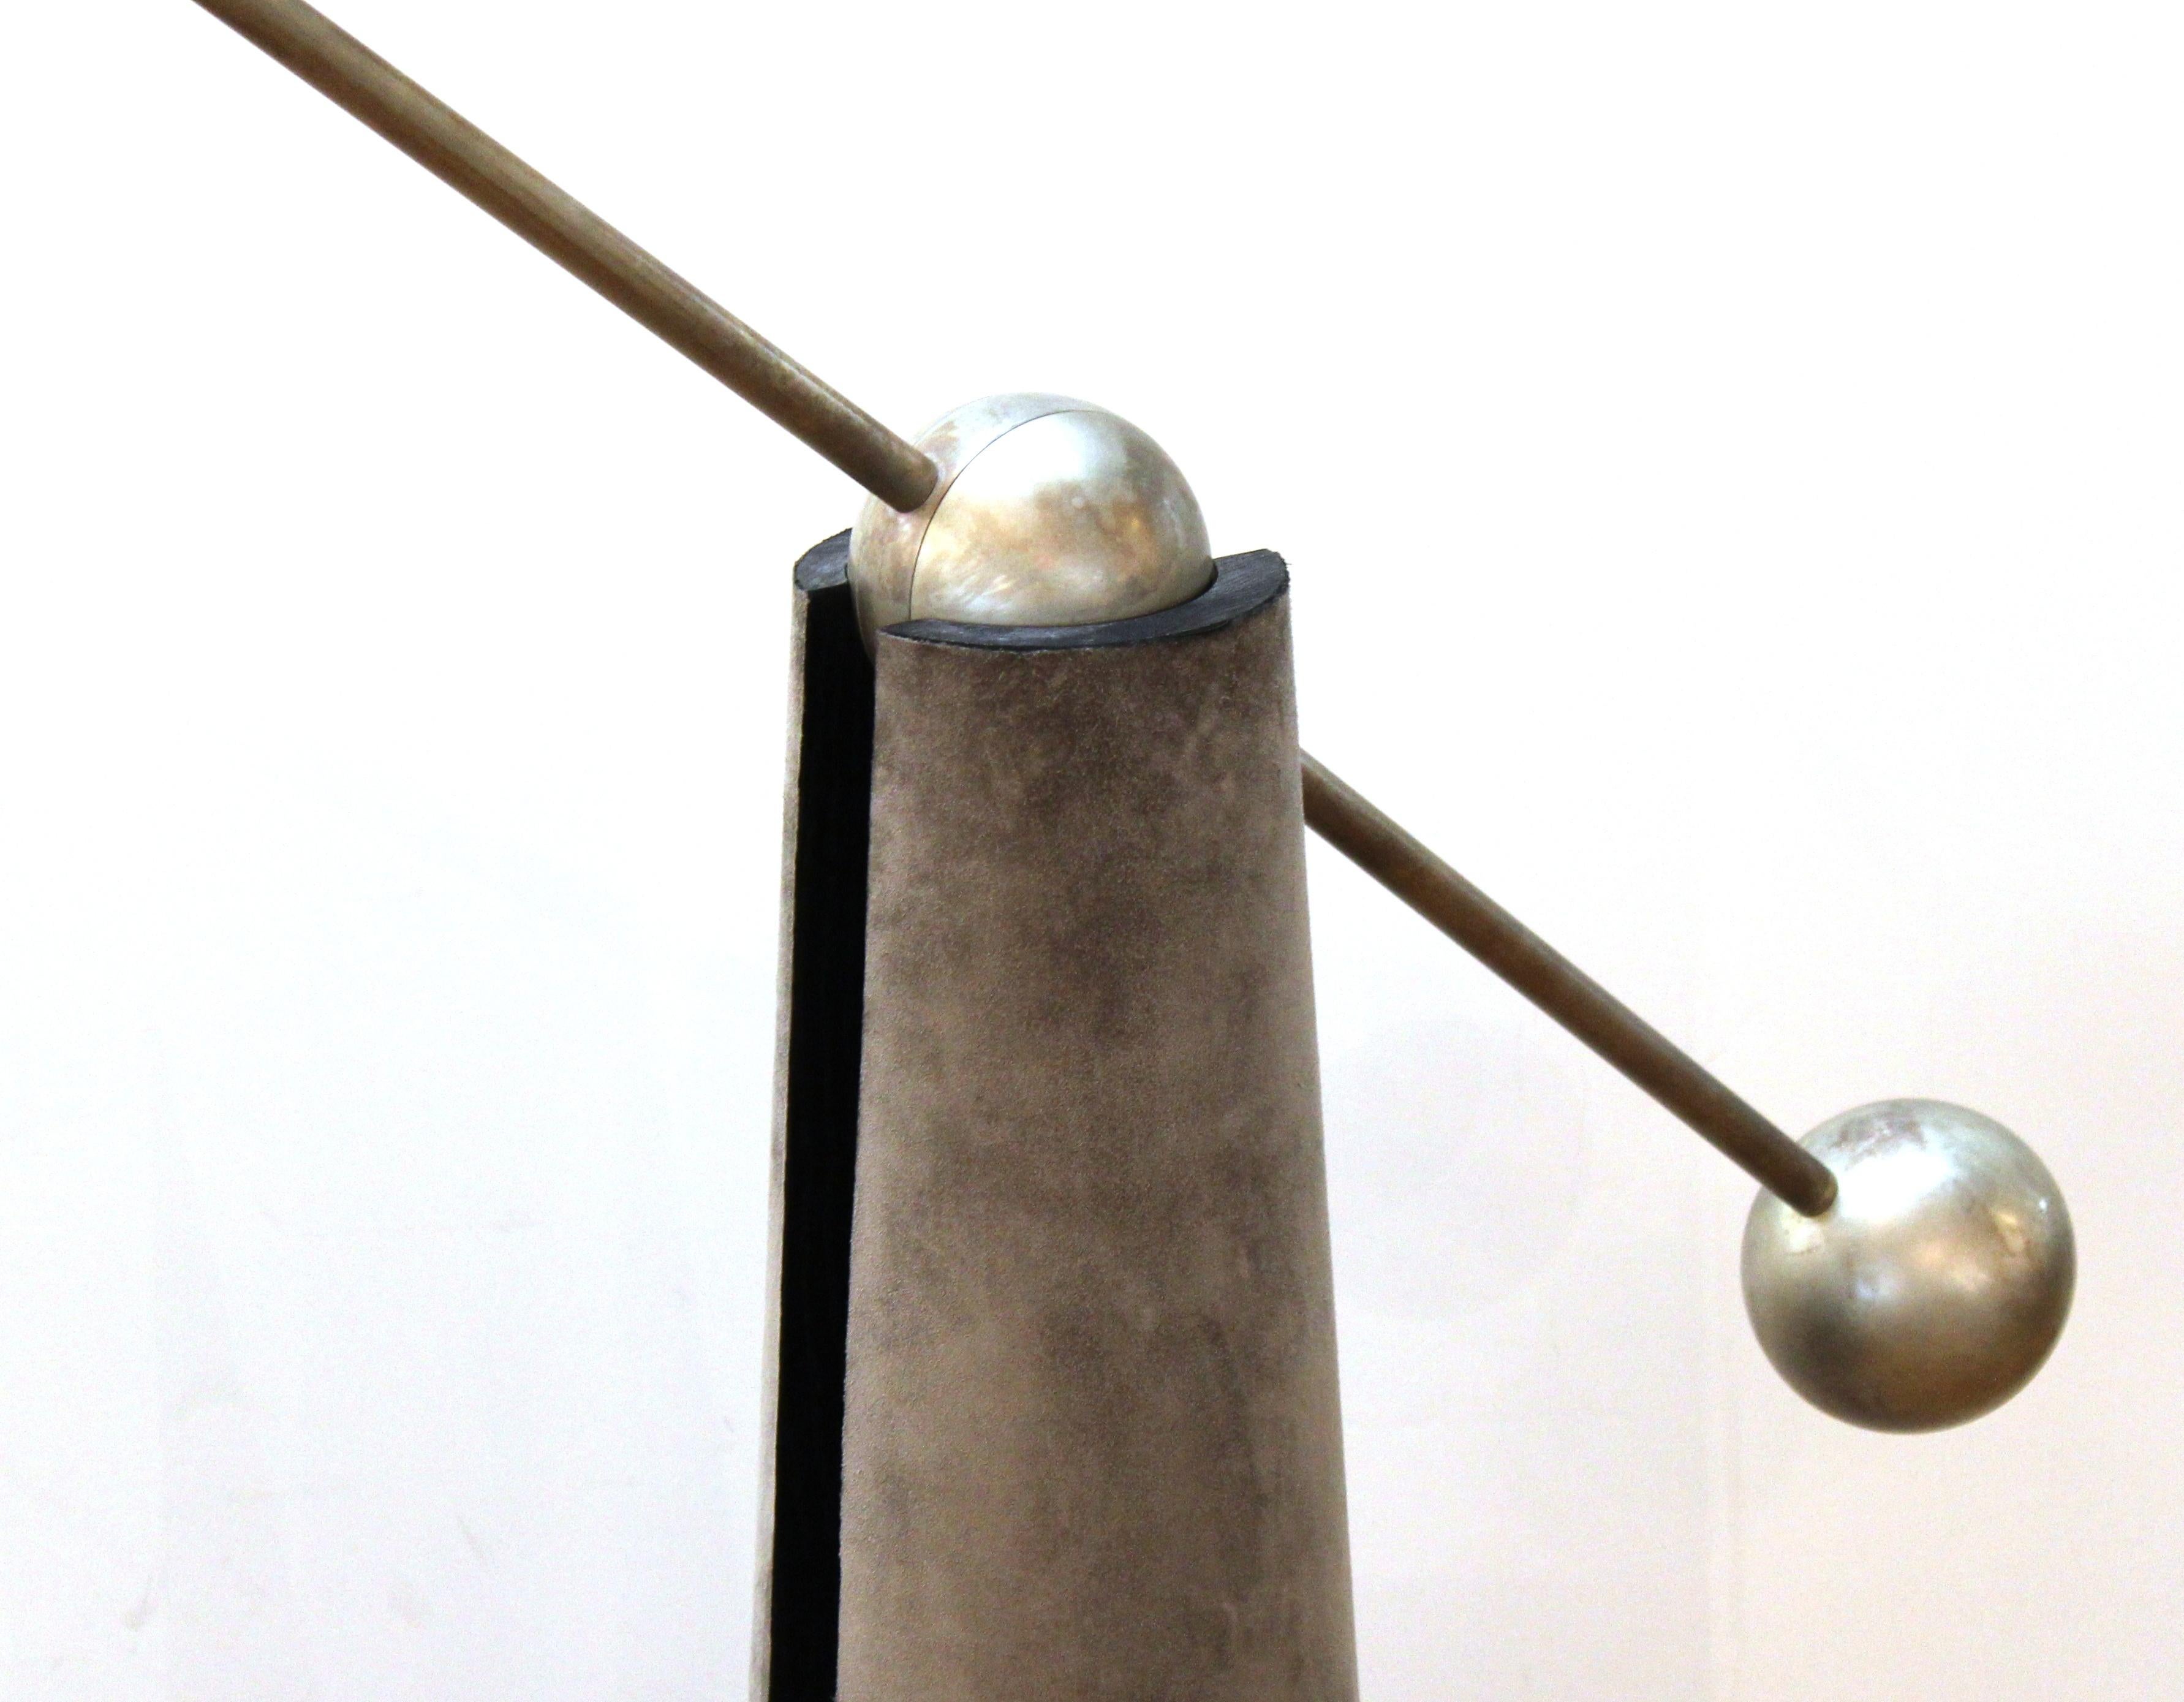 Apparatus 'Metronome' contemporary minimalist floor lamp with hand-wrapped calf suede conical base and articulating polished metal arm.